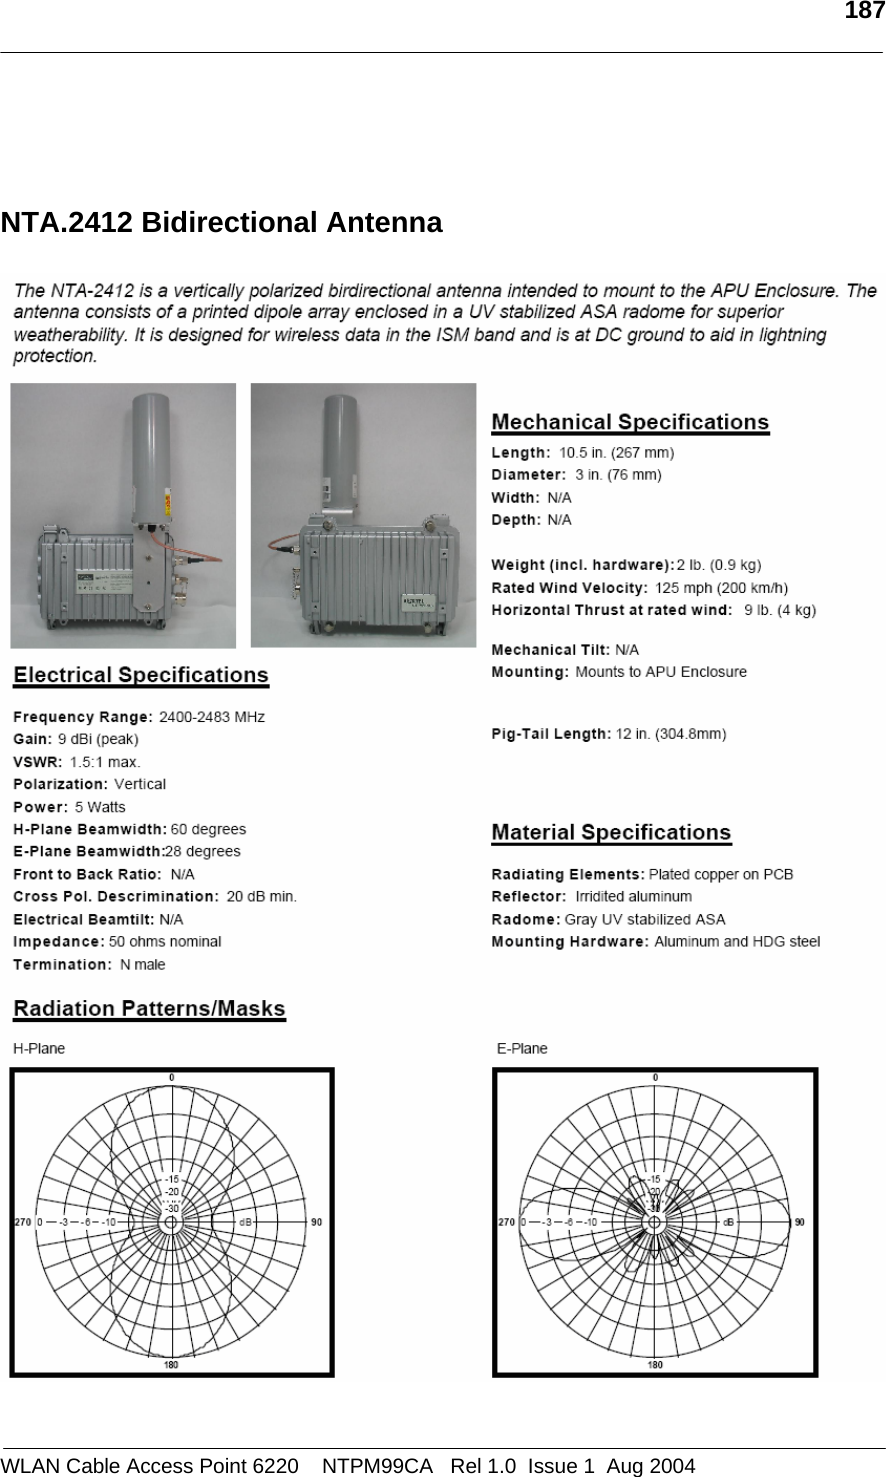   187     NTA.2412 Bidirectional Antenna    WLAN Cable Access Point 6220    NTPM99CA   Rel 1.0  Issue 1  Aug 2004 